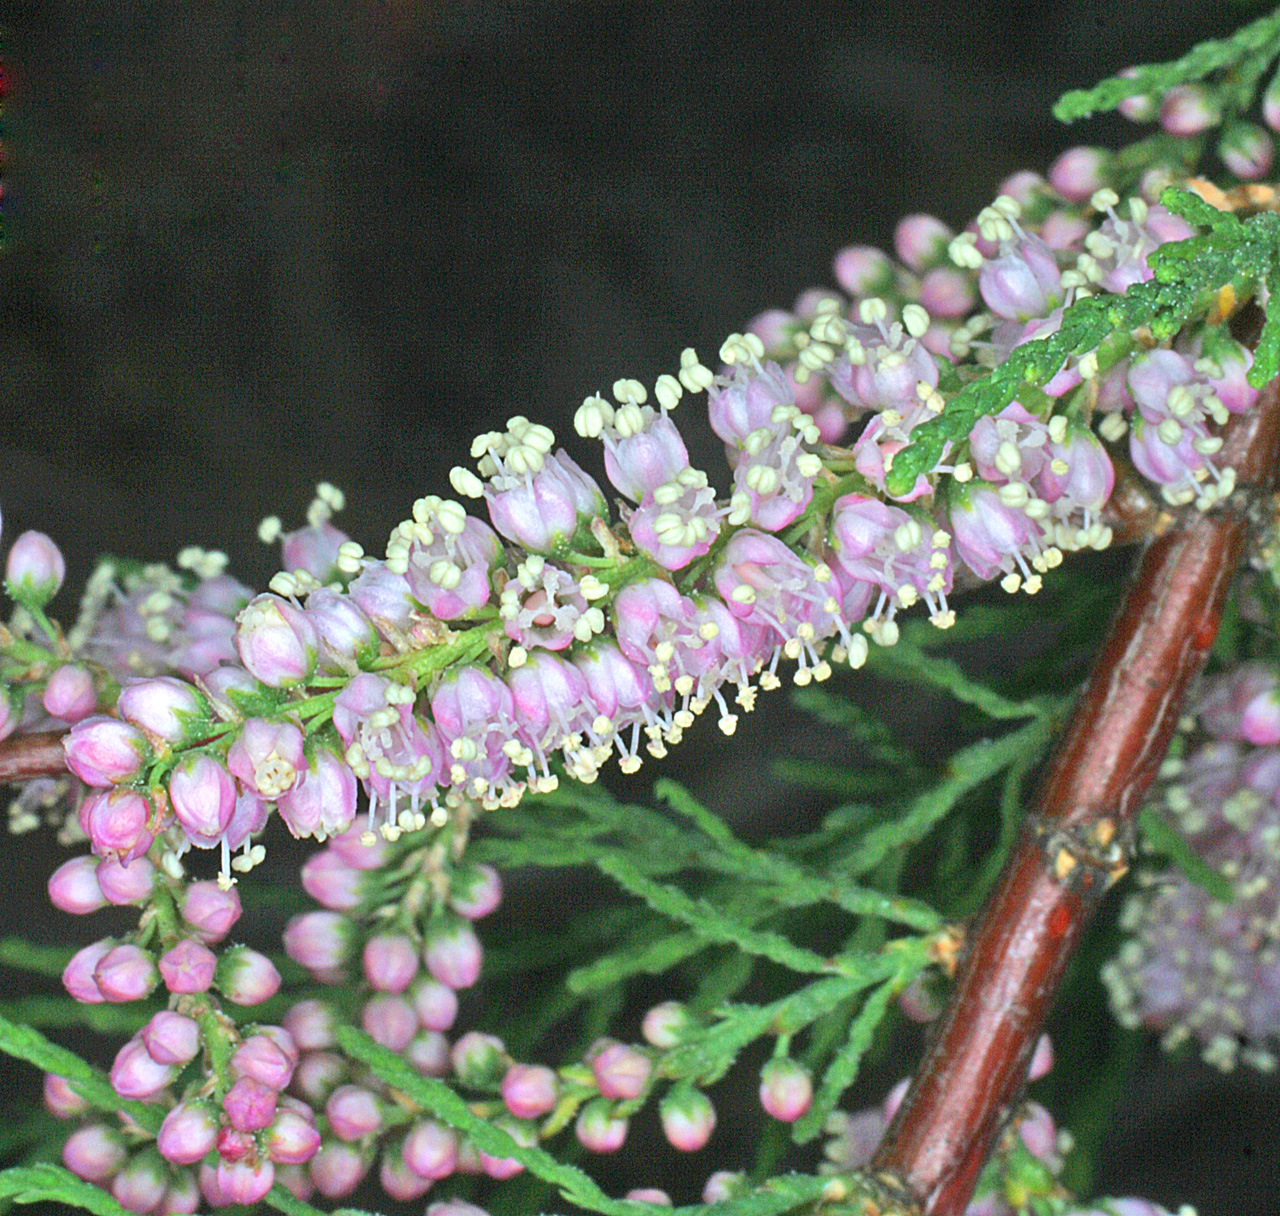 Close-up of the small pink flowers on an inflorescence. They begin as tiny, round buds, and white stamens emerge when the blossom opens